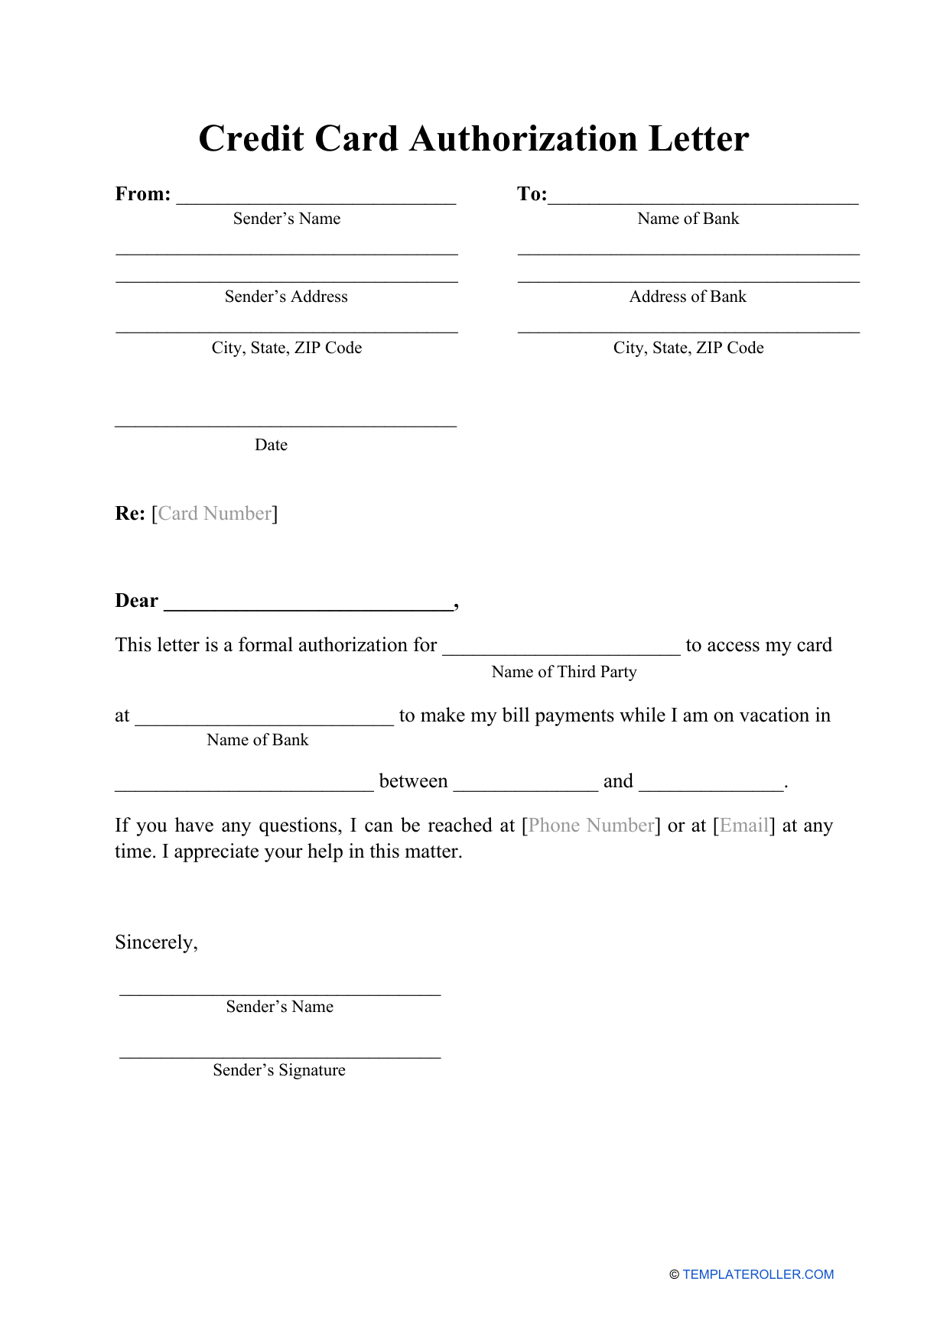 Credit Card Authorization Letter Template Download Printable PDF For Credit Card Billing Authorization Form Template